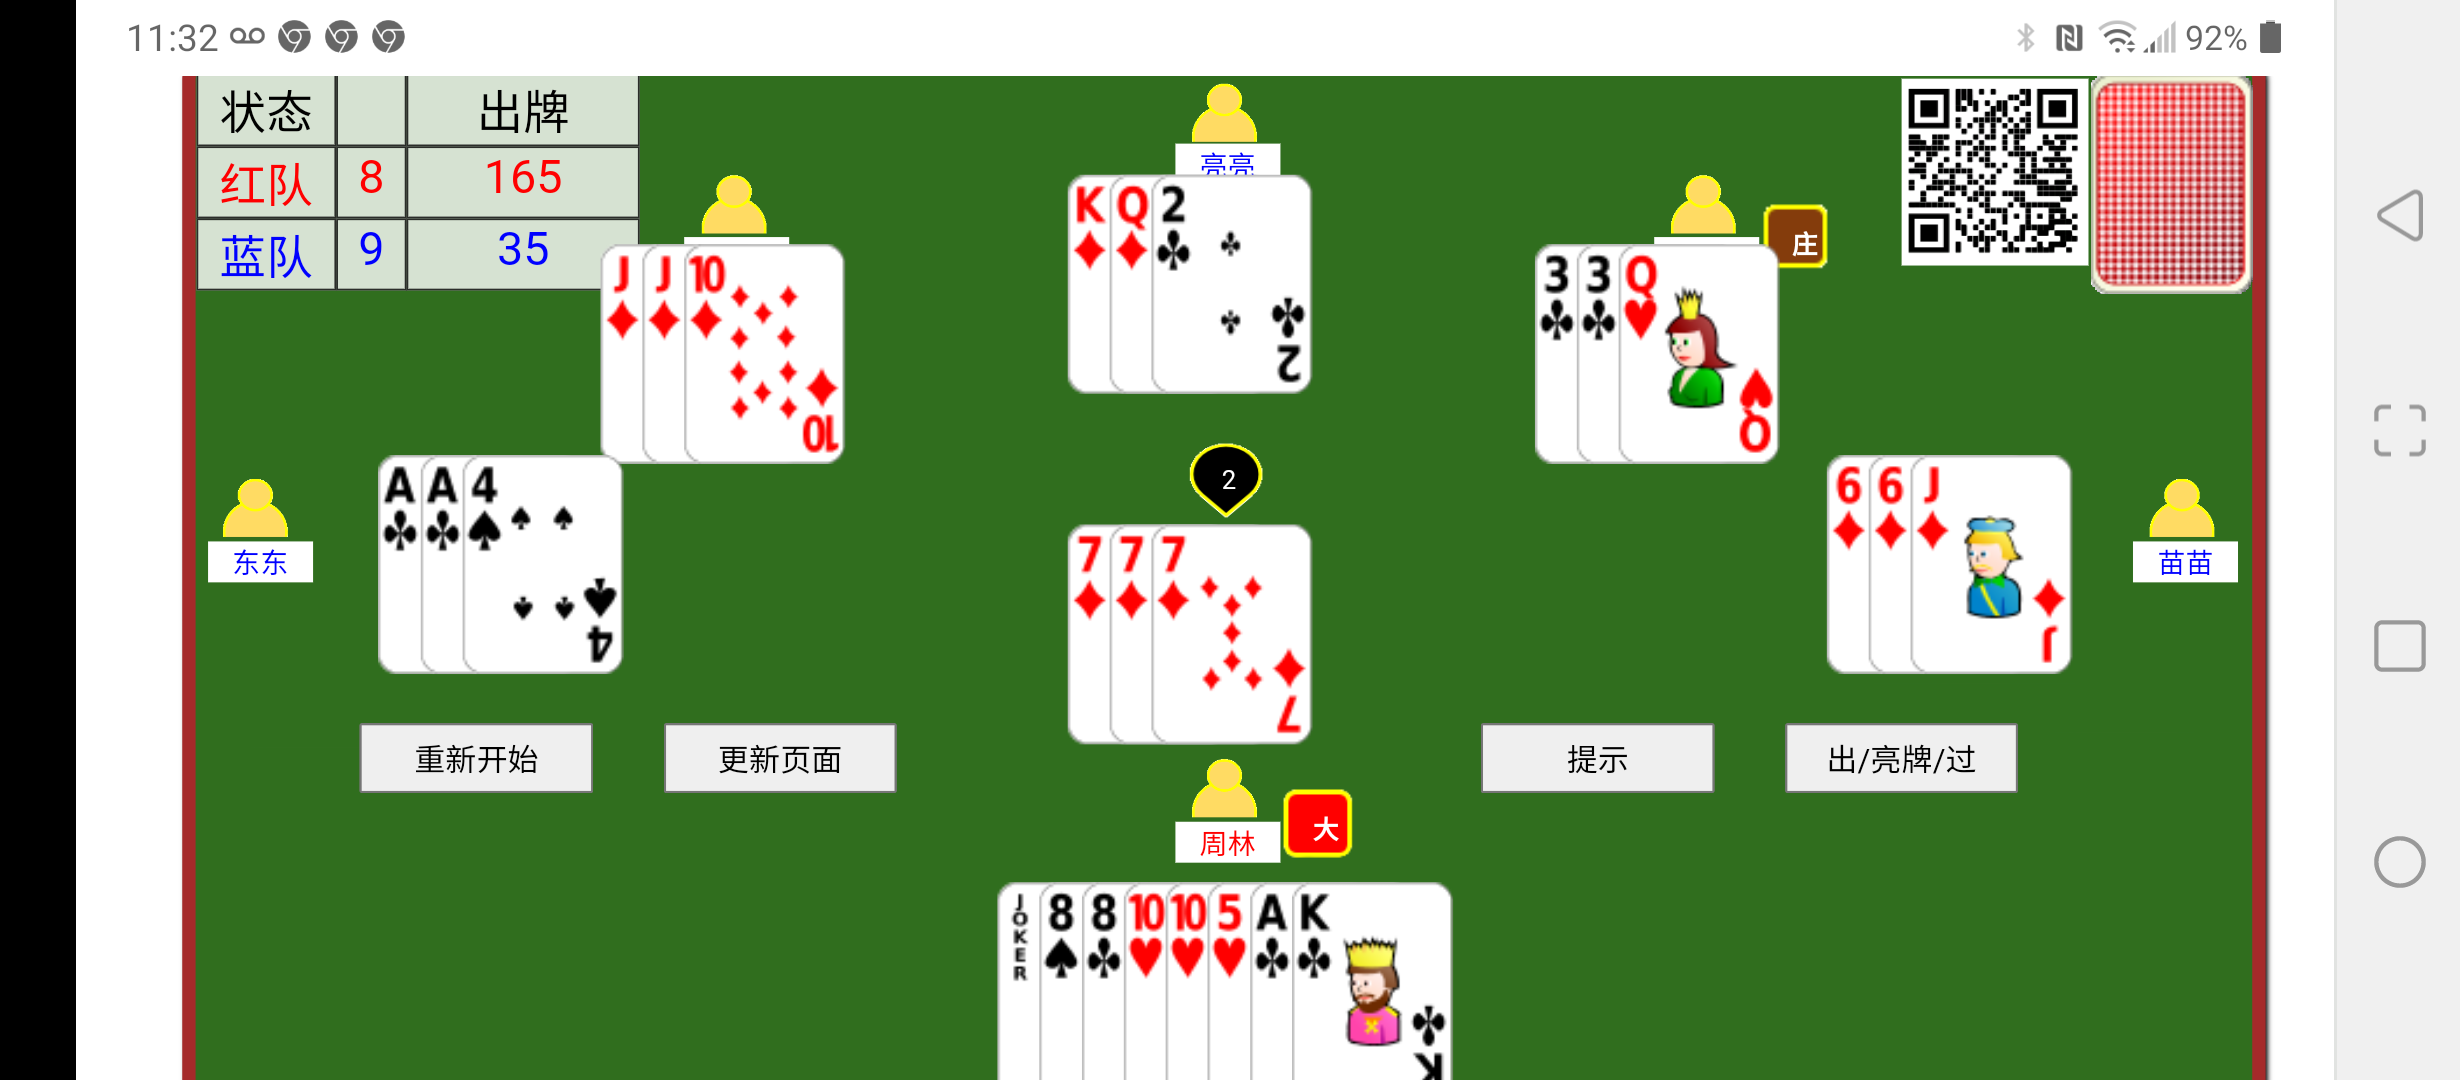 html5 tractor card game Screenshot_20220122-113224.png